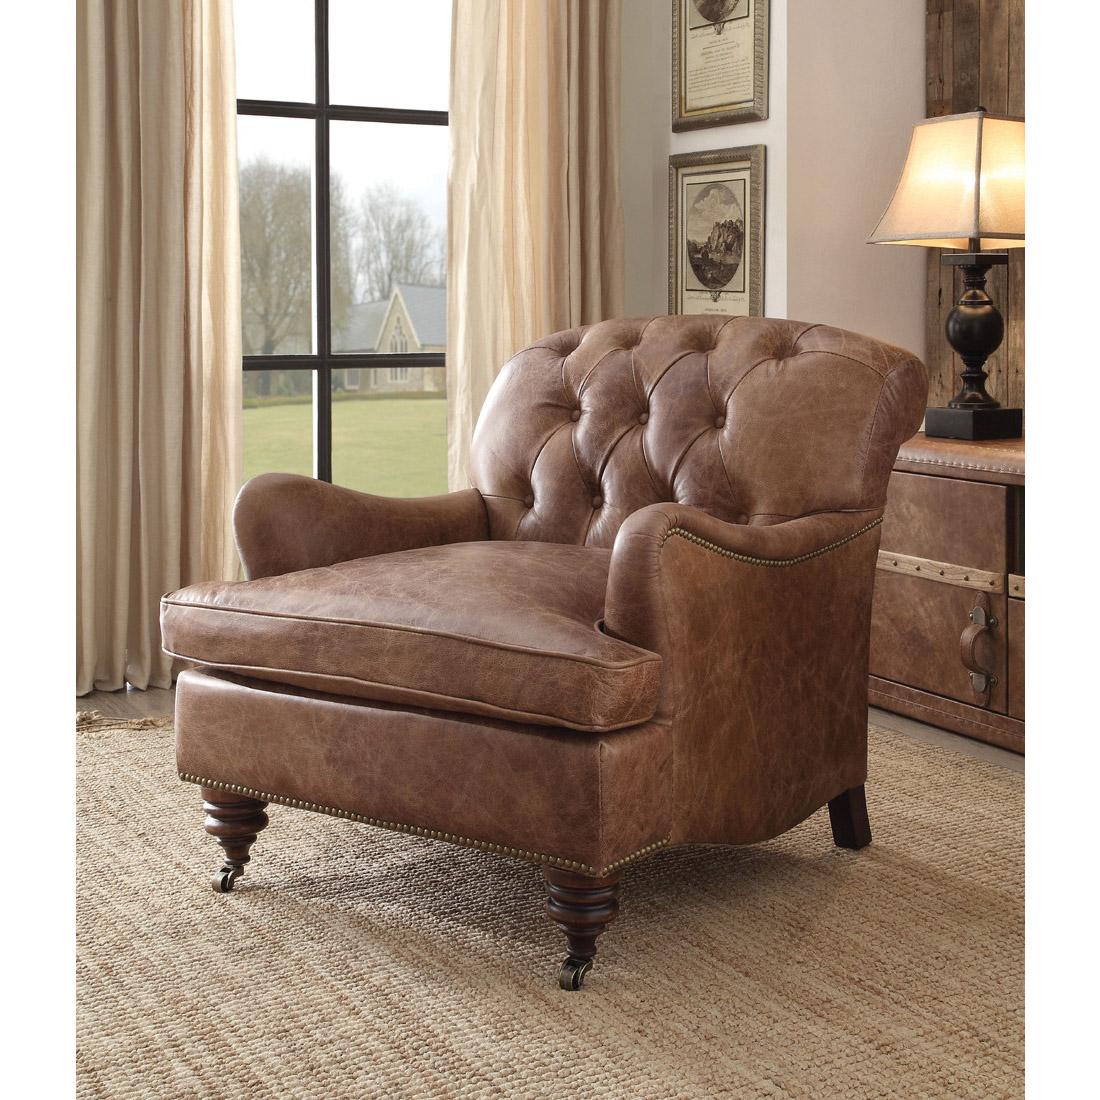 Classic, Traditional Accent Chair Durham Durham-96677 in Brown Top grain leather